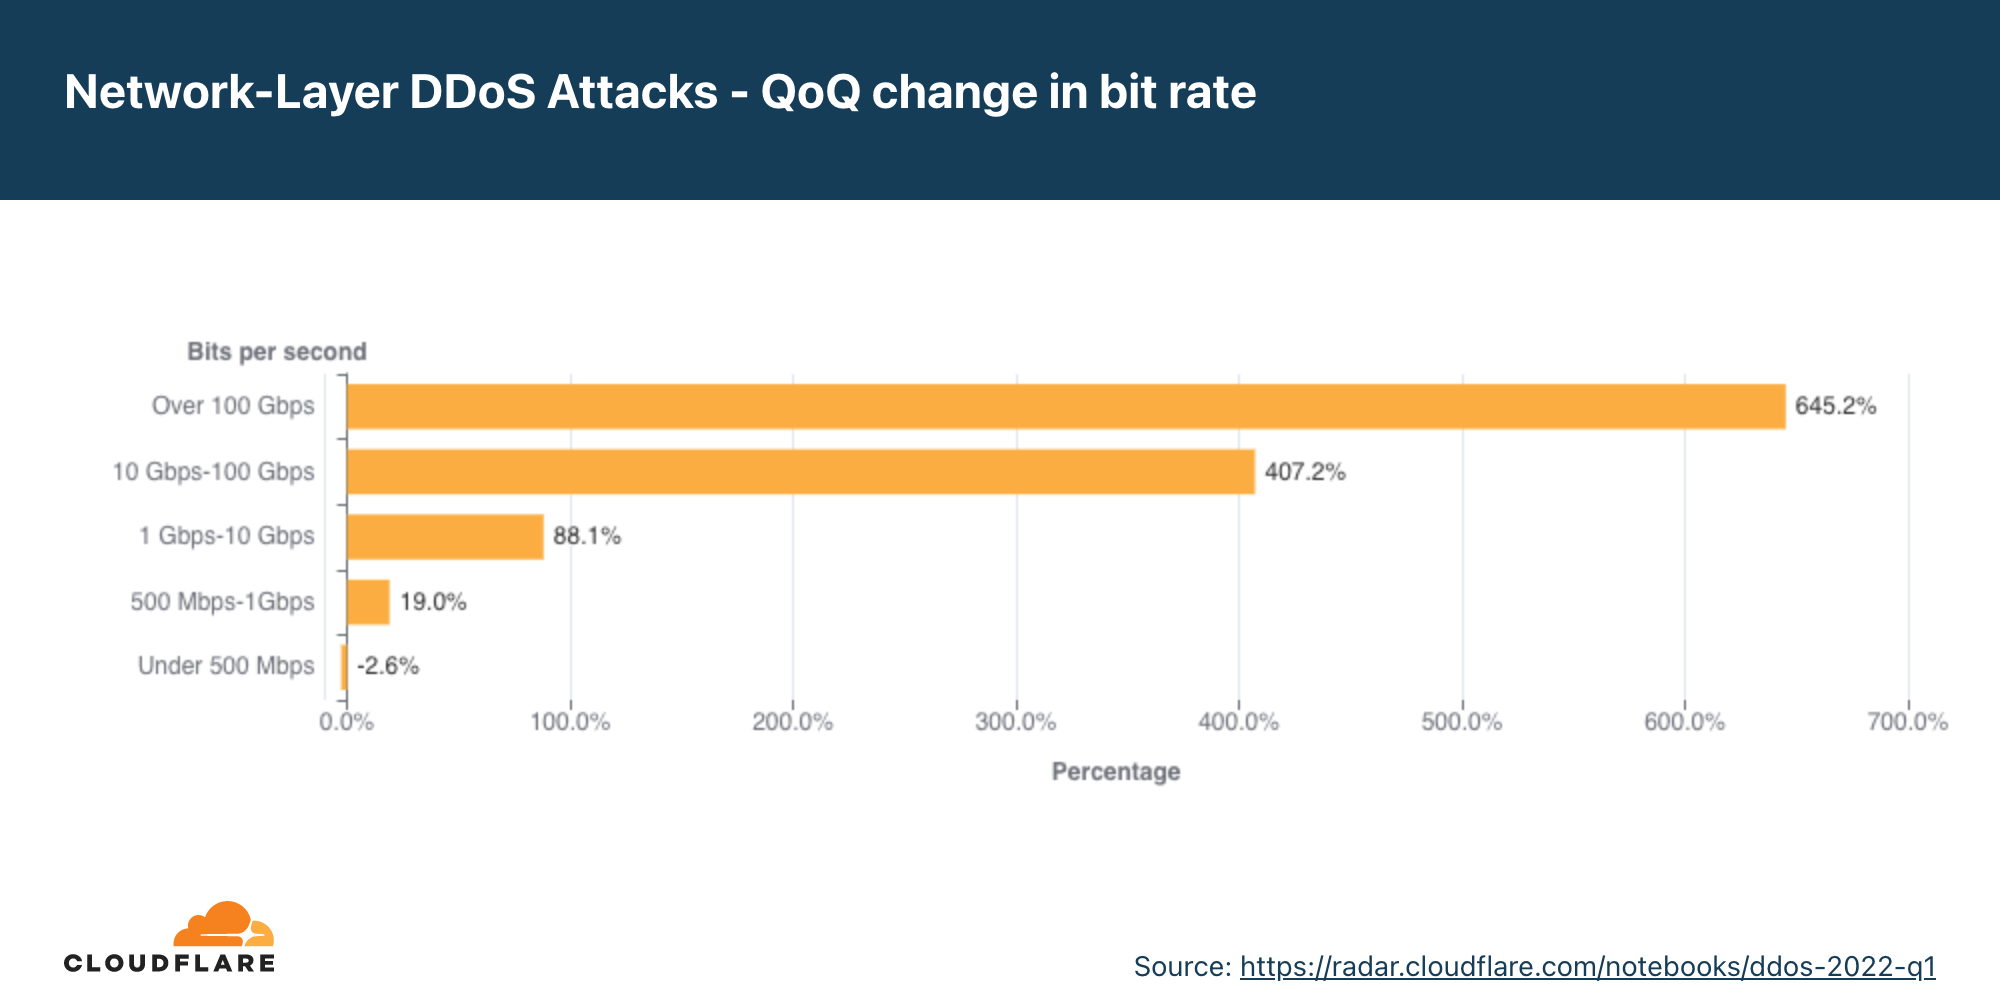 Graph of the change in the distribution of network-layer DDoS attacks by bit rate quarter over quarter